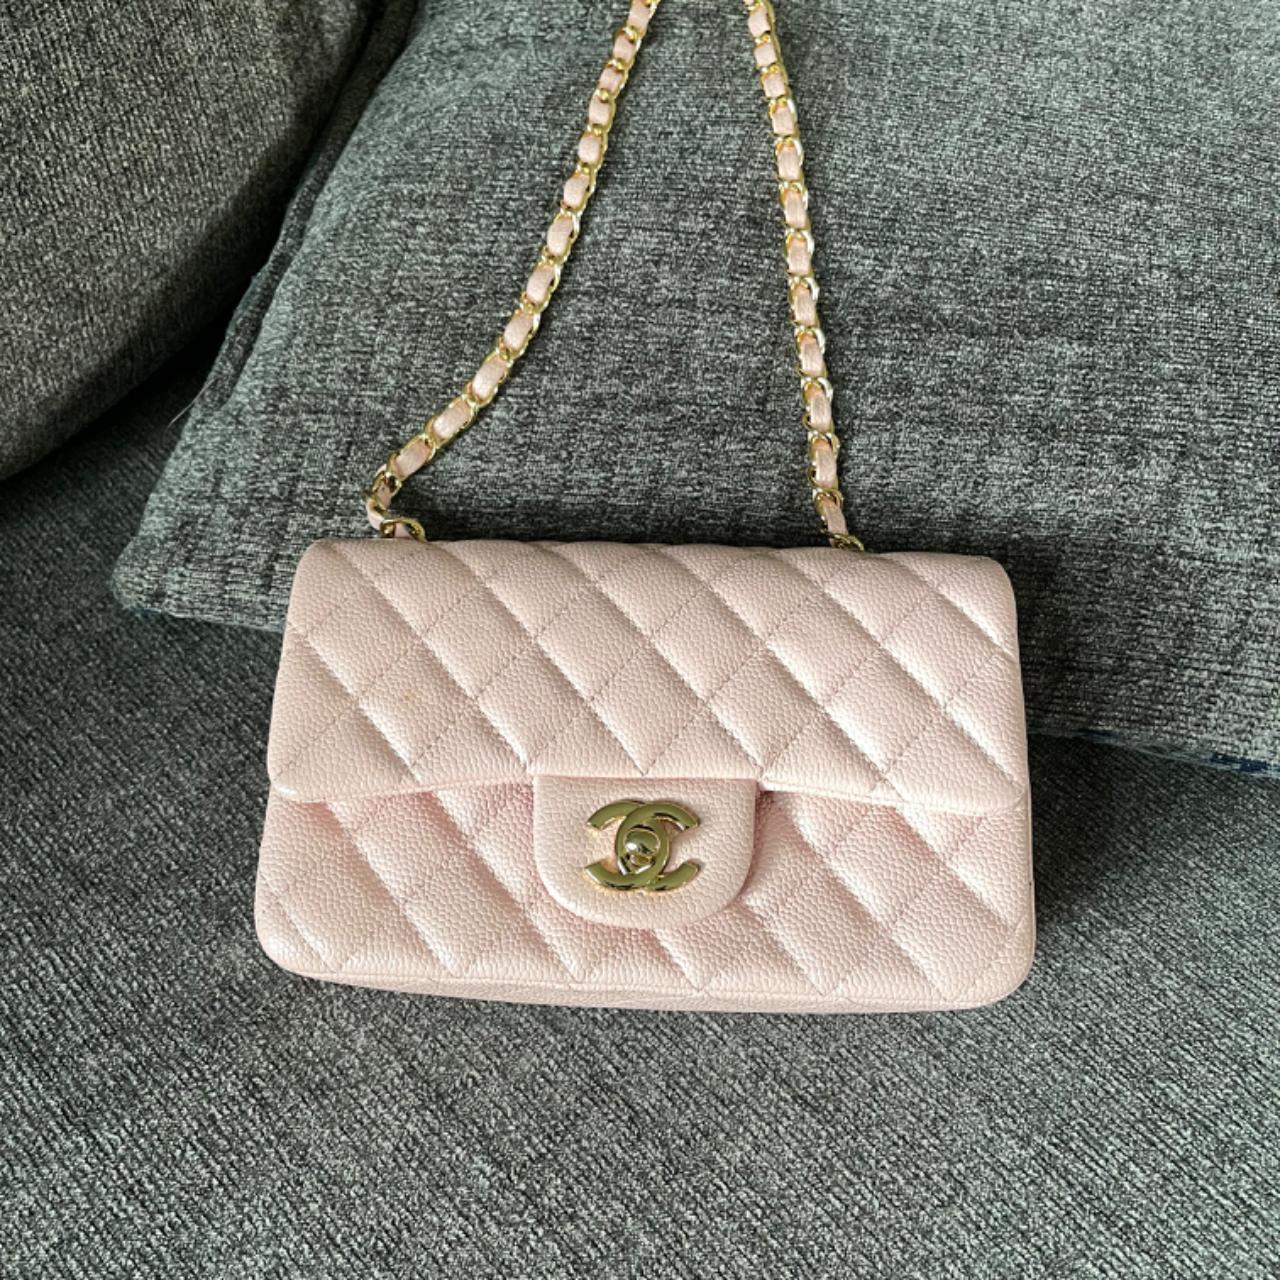 Men's Chanel Accessories, New & Used